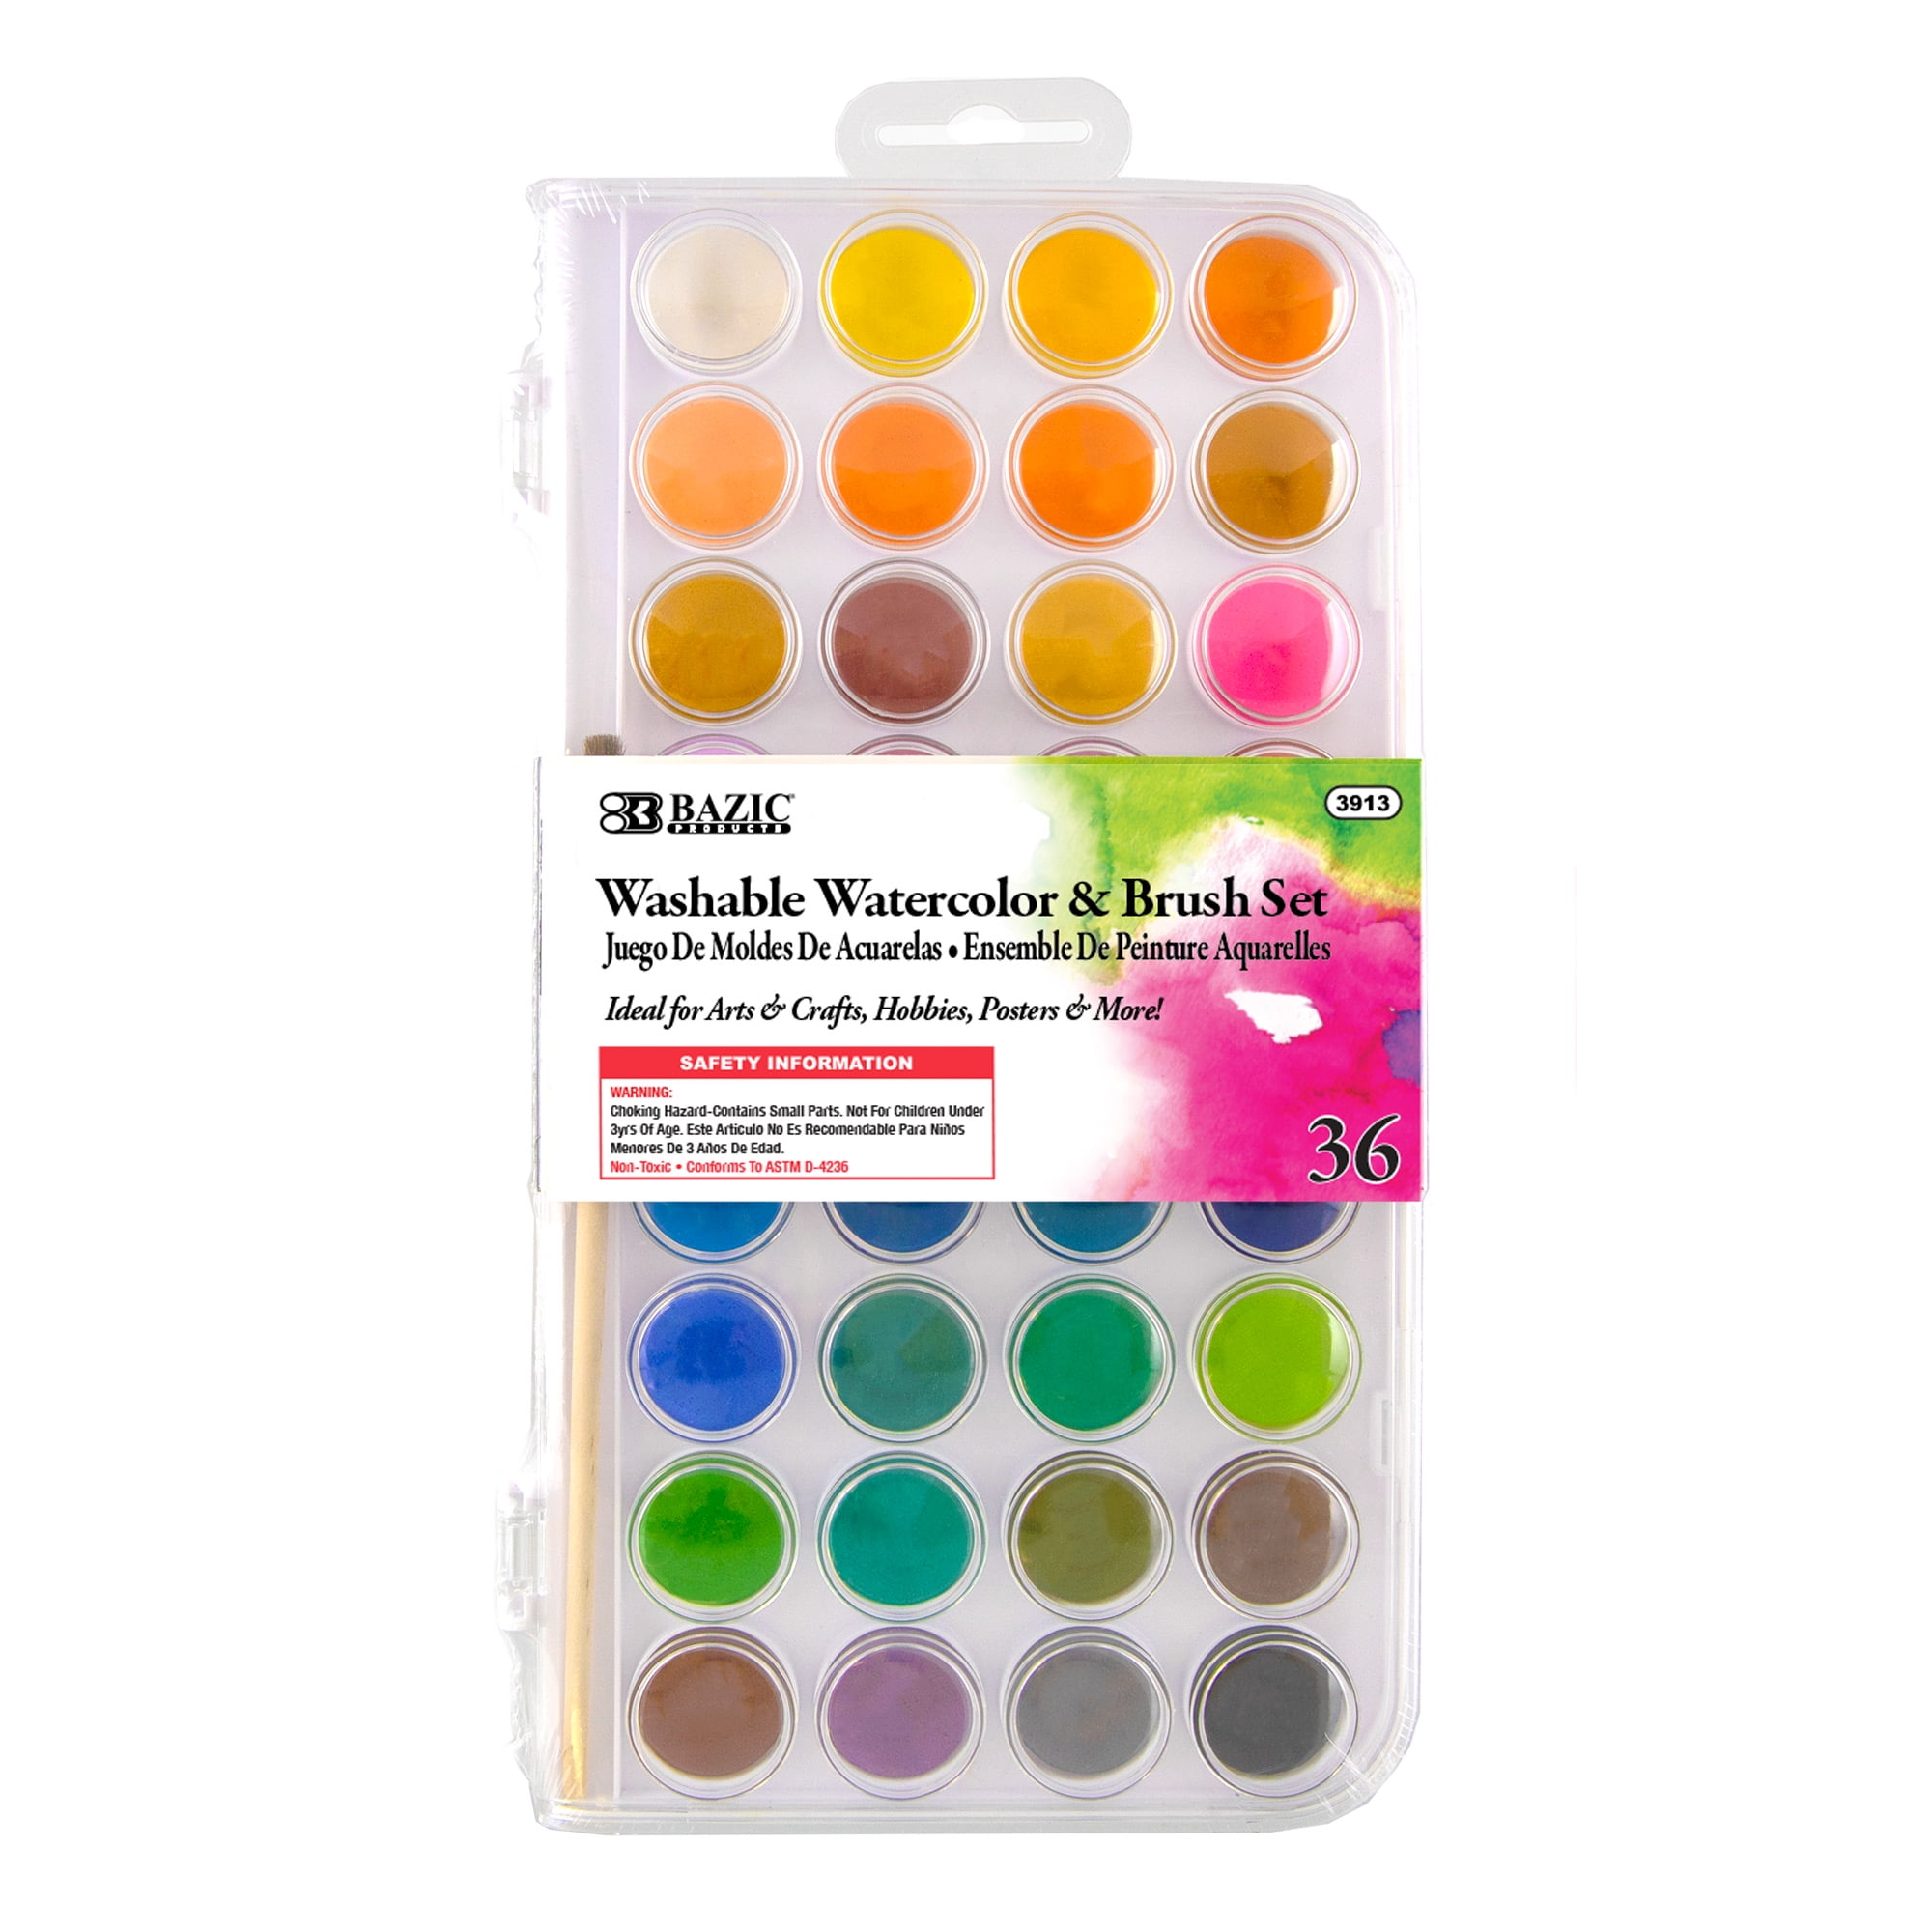 BAZIC Watercolor w/ Brush & Mixing Palette, 36 Color Non-Toxic, 12-Pack 